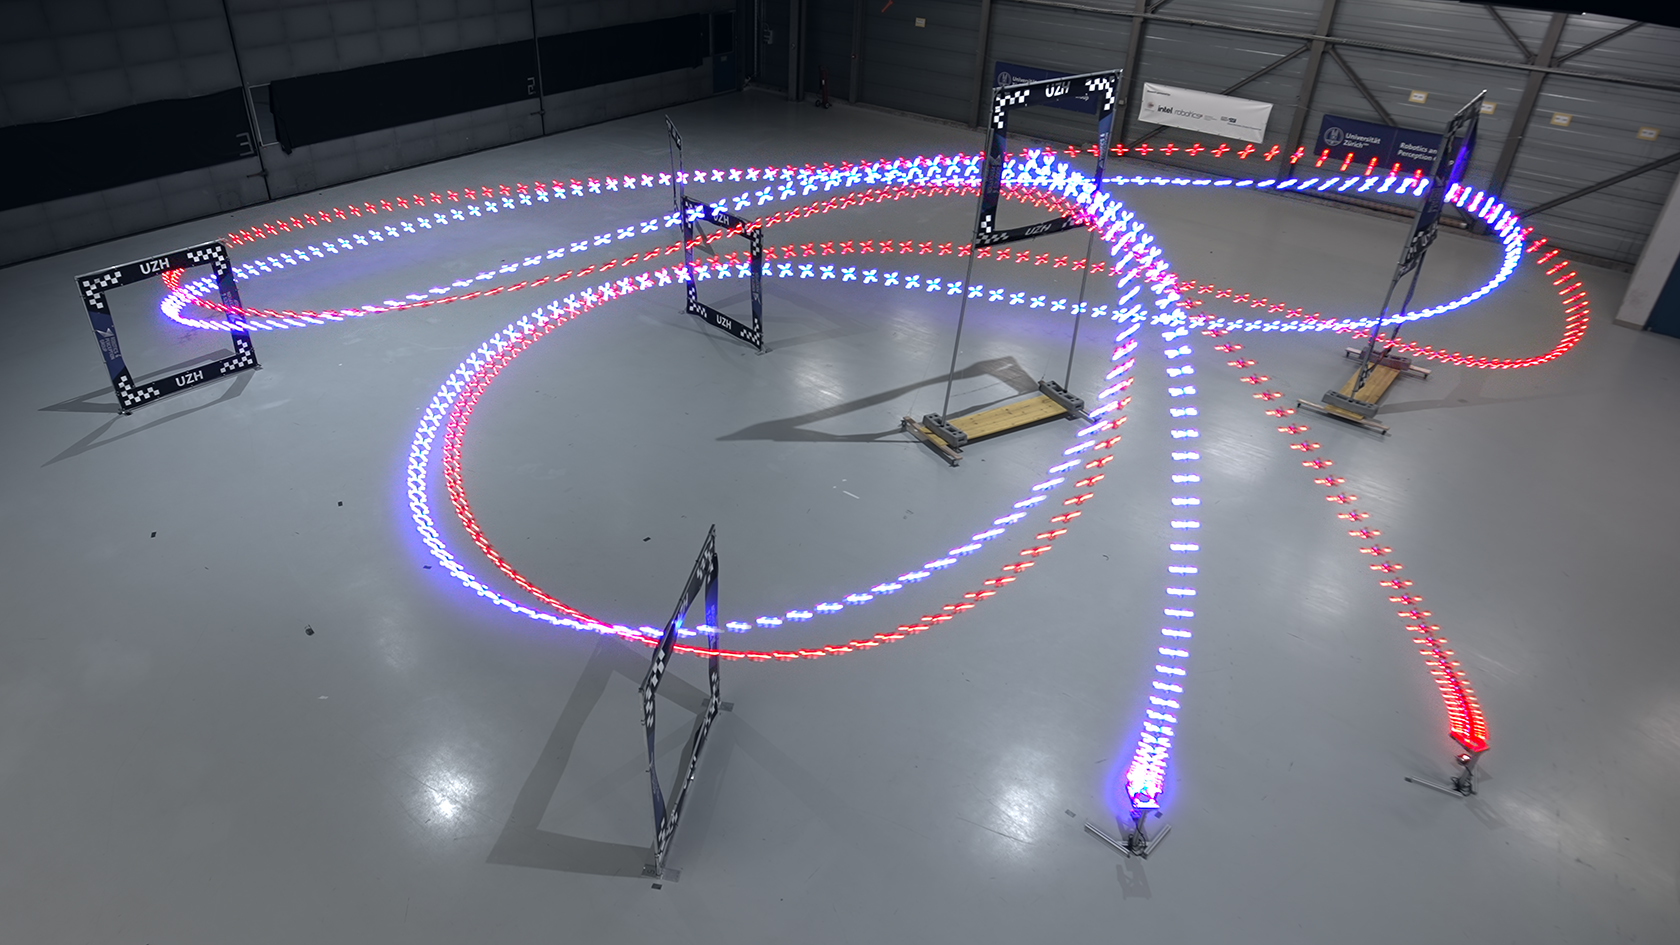 Photo of a racetrack for drones